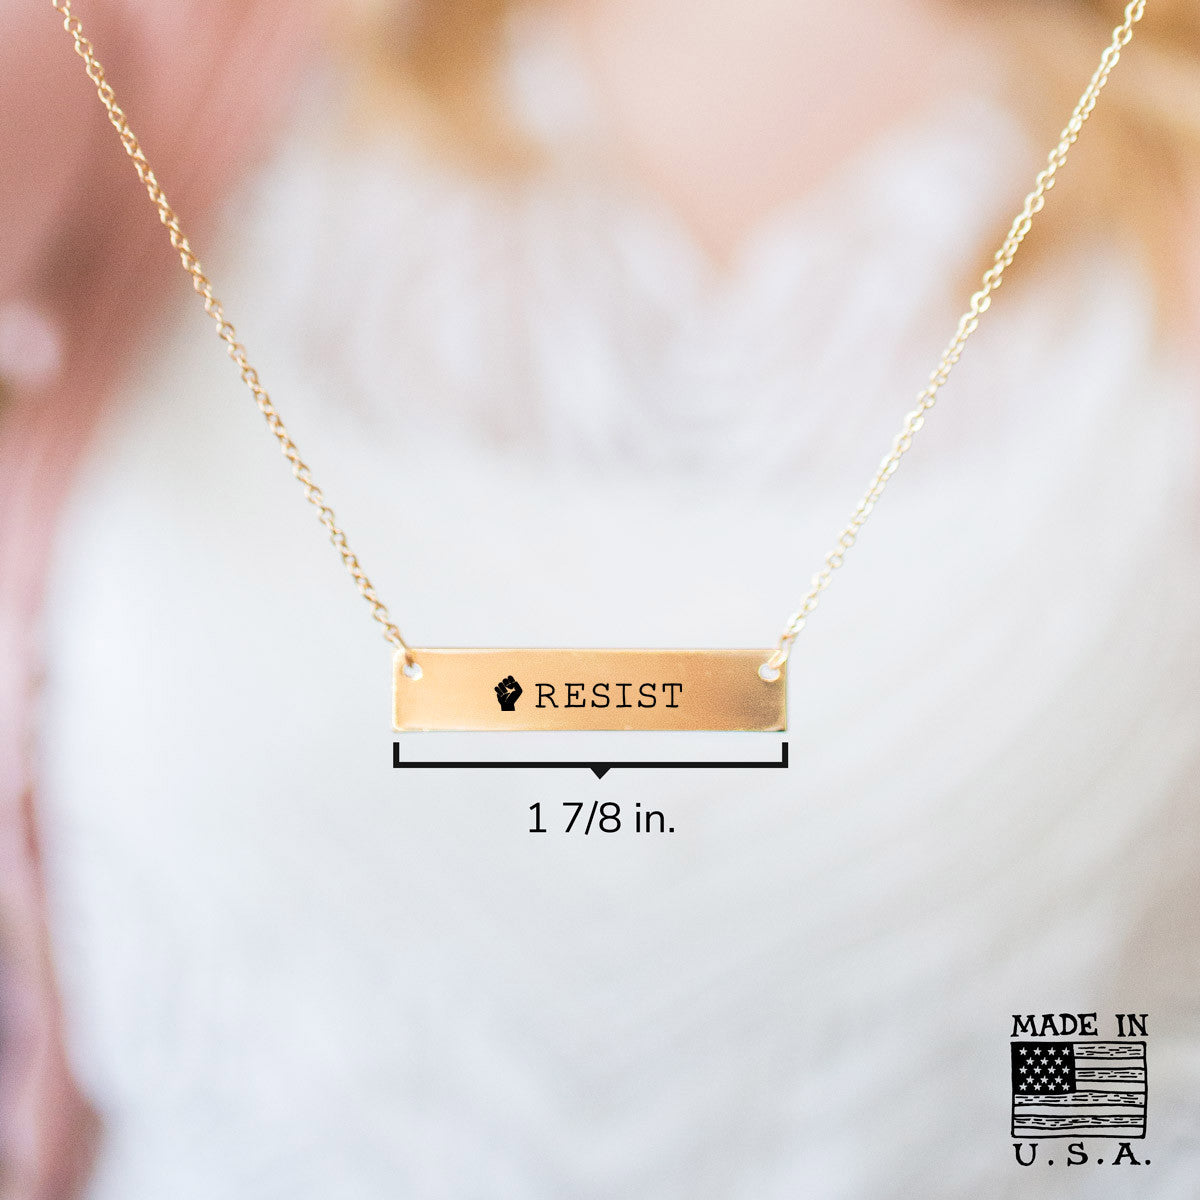 Resist Gold / Silver Bar Necklace - pipercleo.com